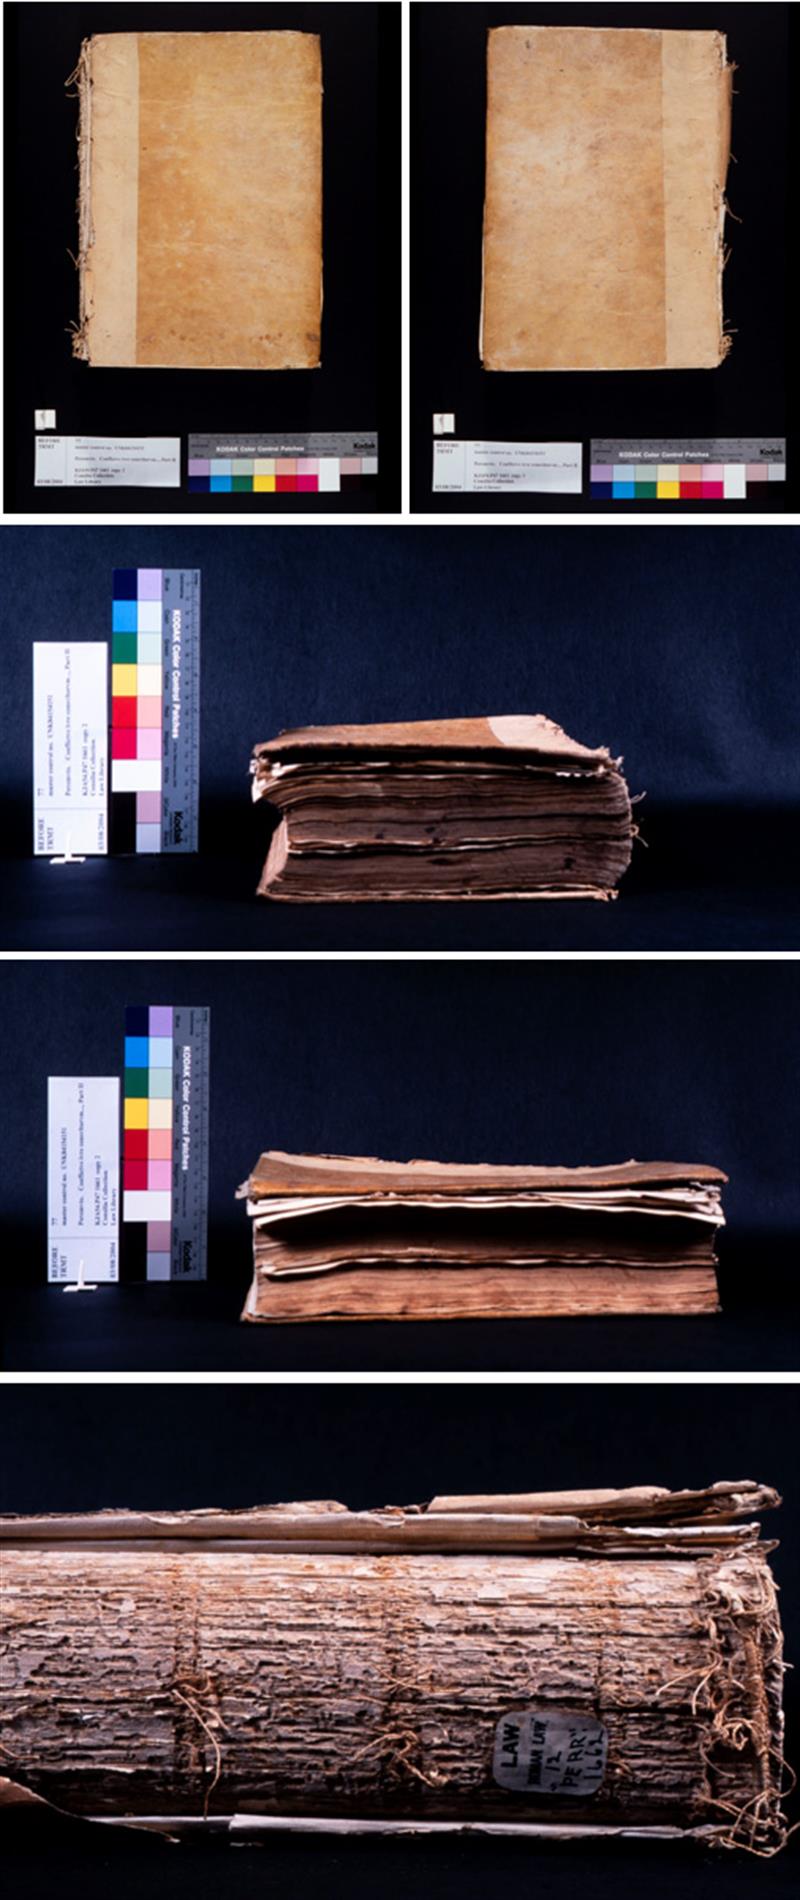 Images, from different angles, of the degraded book cover and binding.